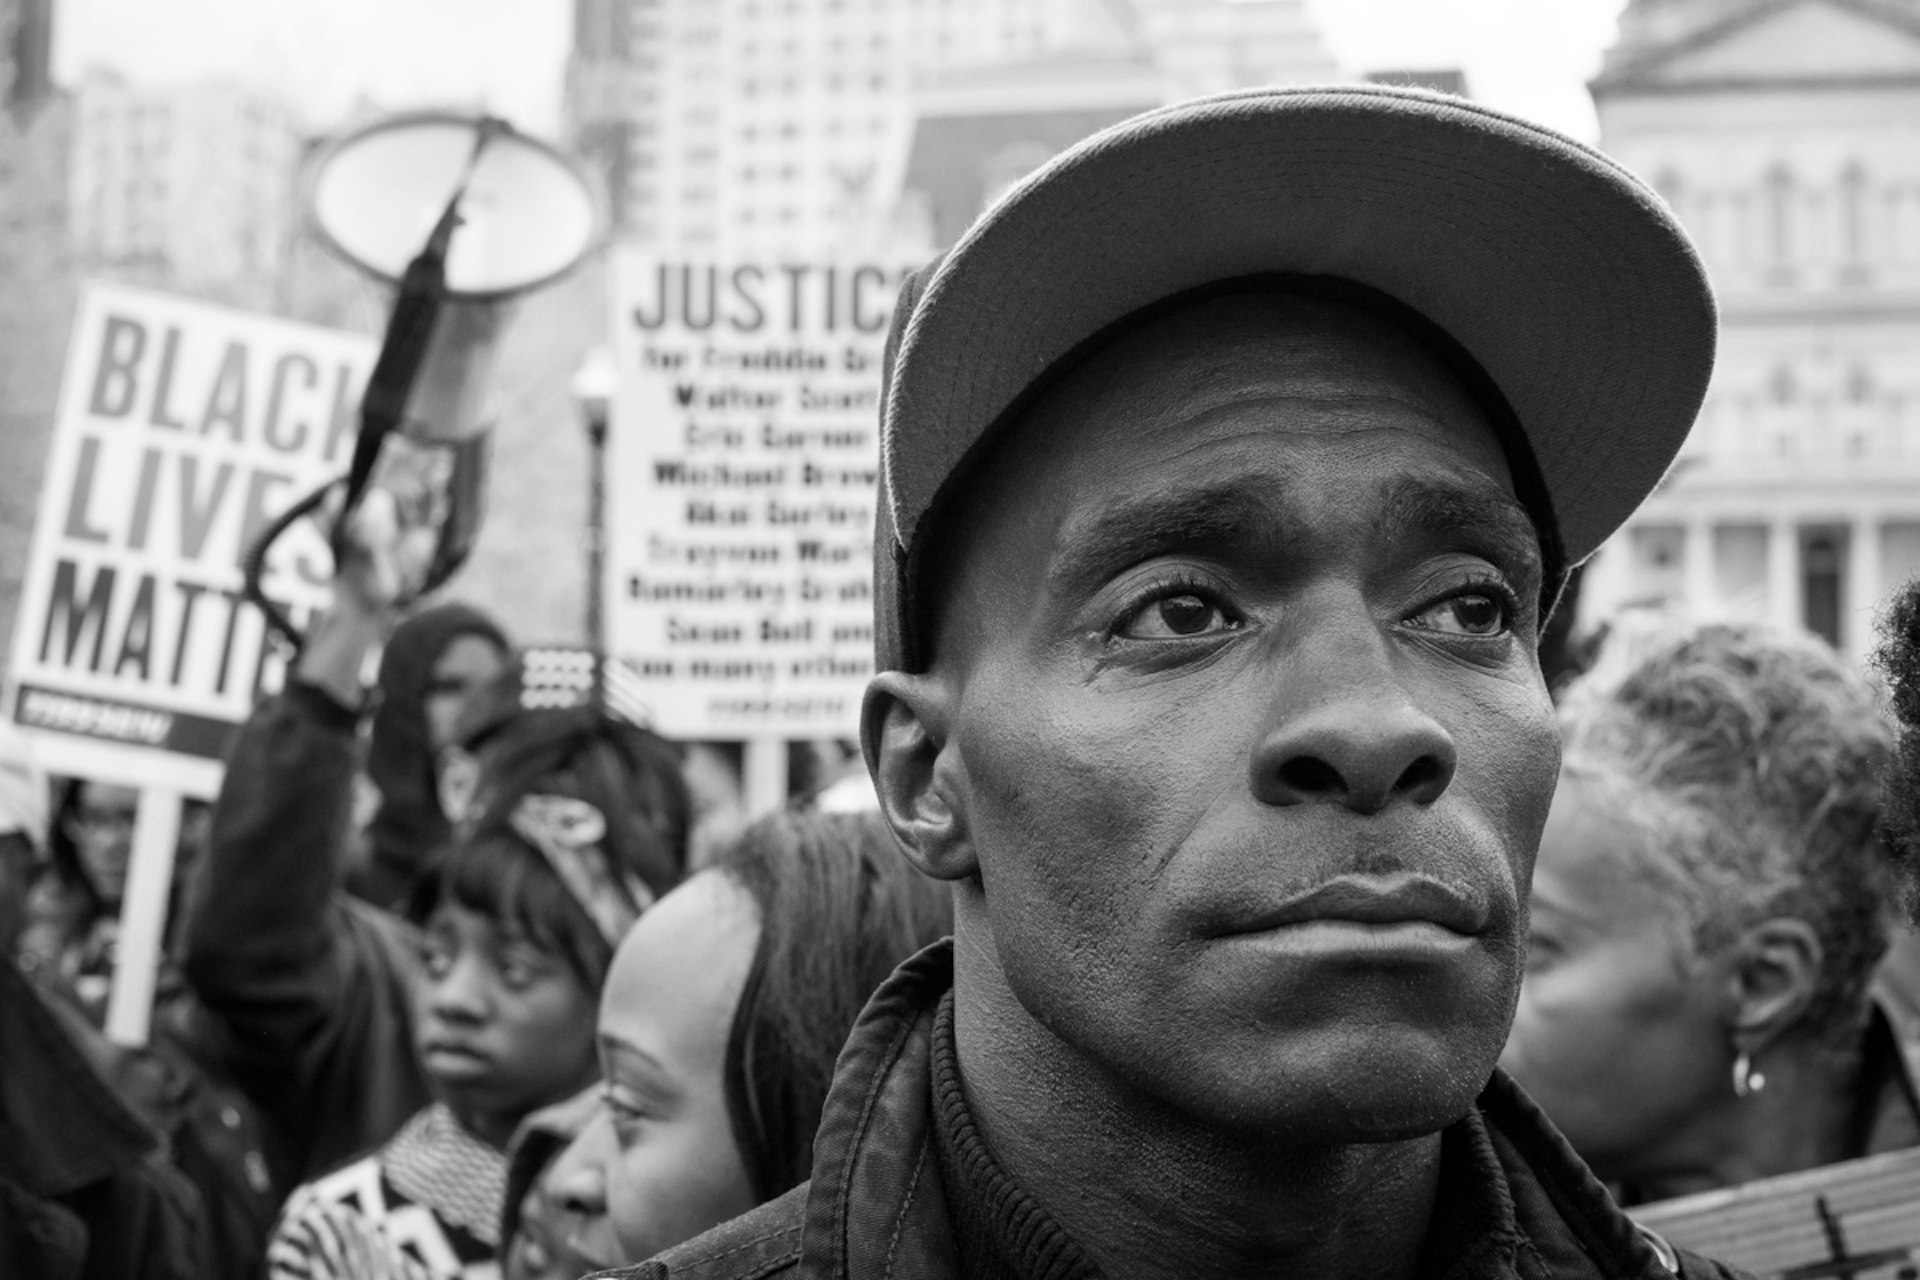 ‘I can’t believe’ Photo by Michael A. McCoy. Freddie Gray Protest, Baltimore, MD, 2015